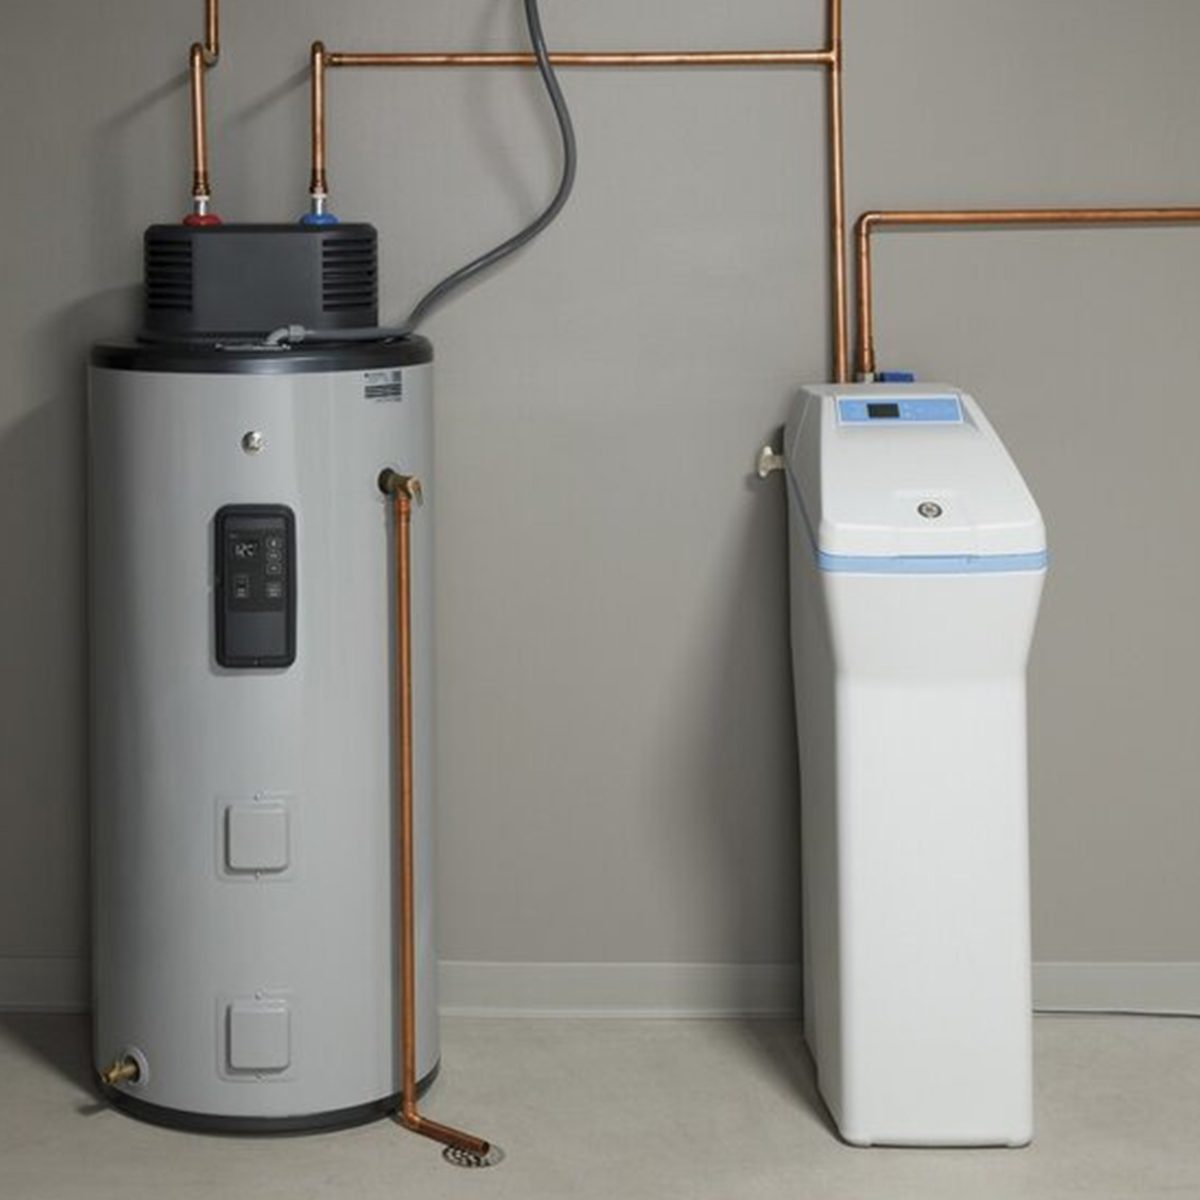 Most Recommended Electric, Gas, Tankless Water Heaters According To Experts